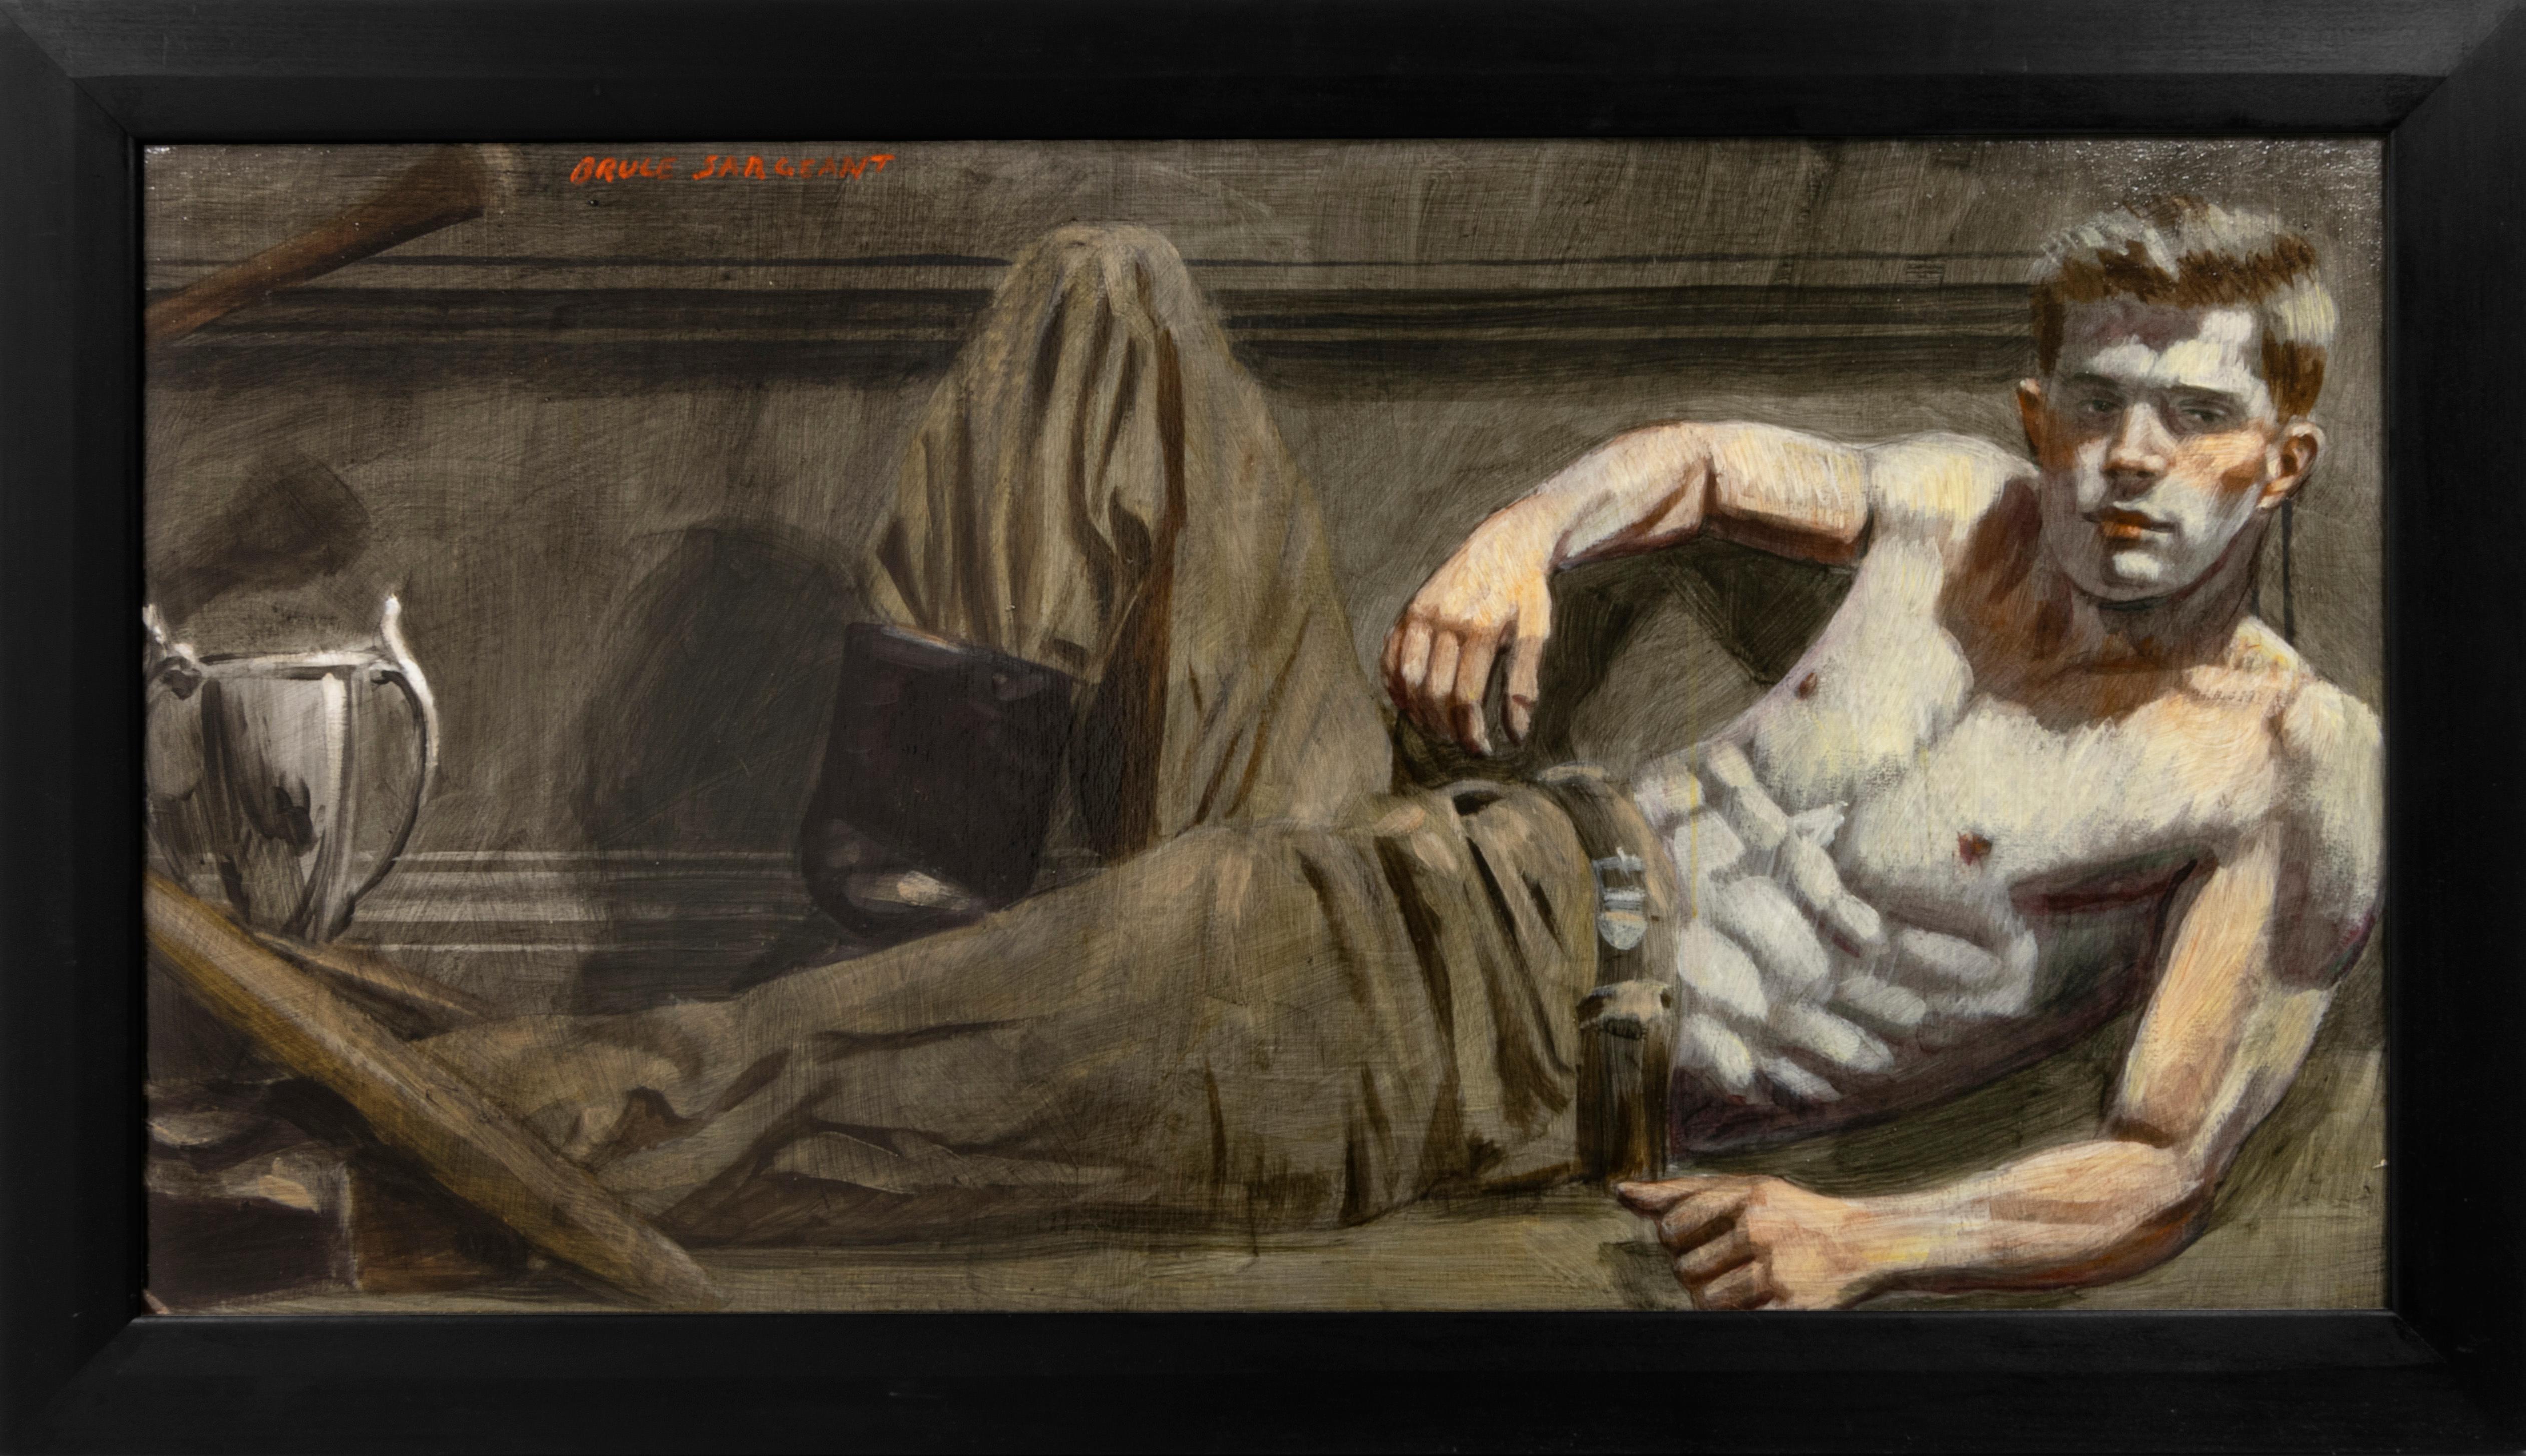 [Bruce Sargeant (1898-1938)] Reclining with a Trophy by his Feet - Painting by Mark Beard